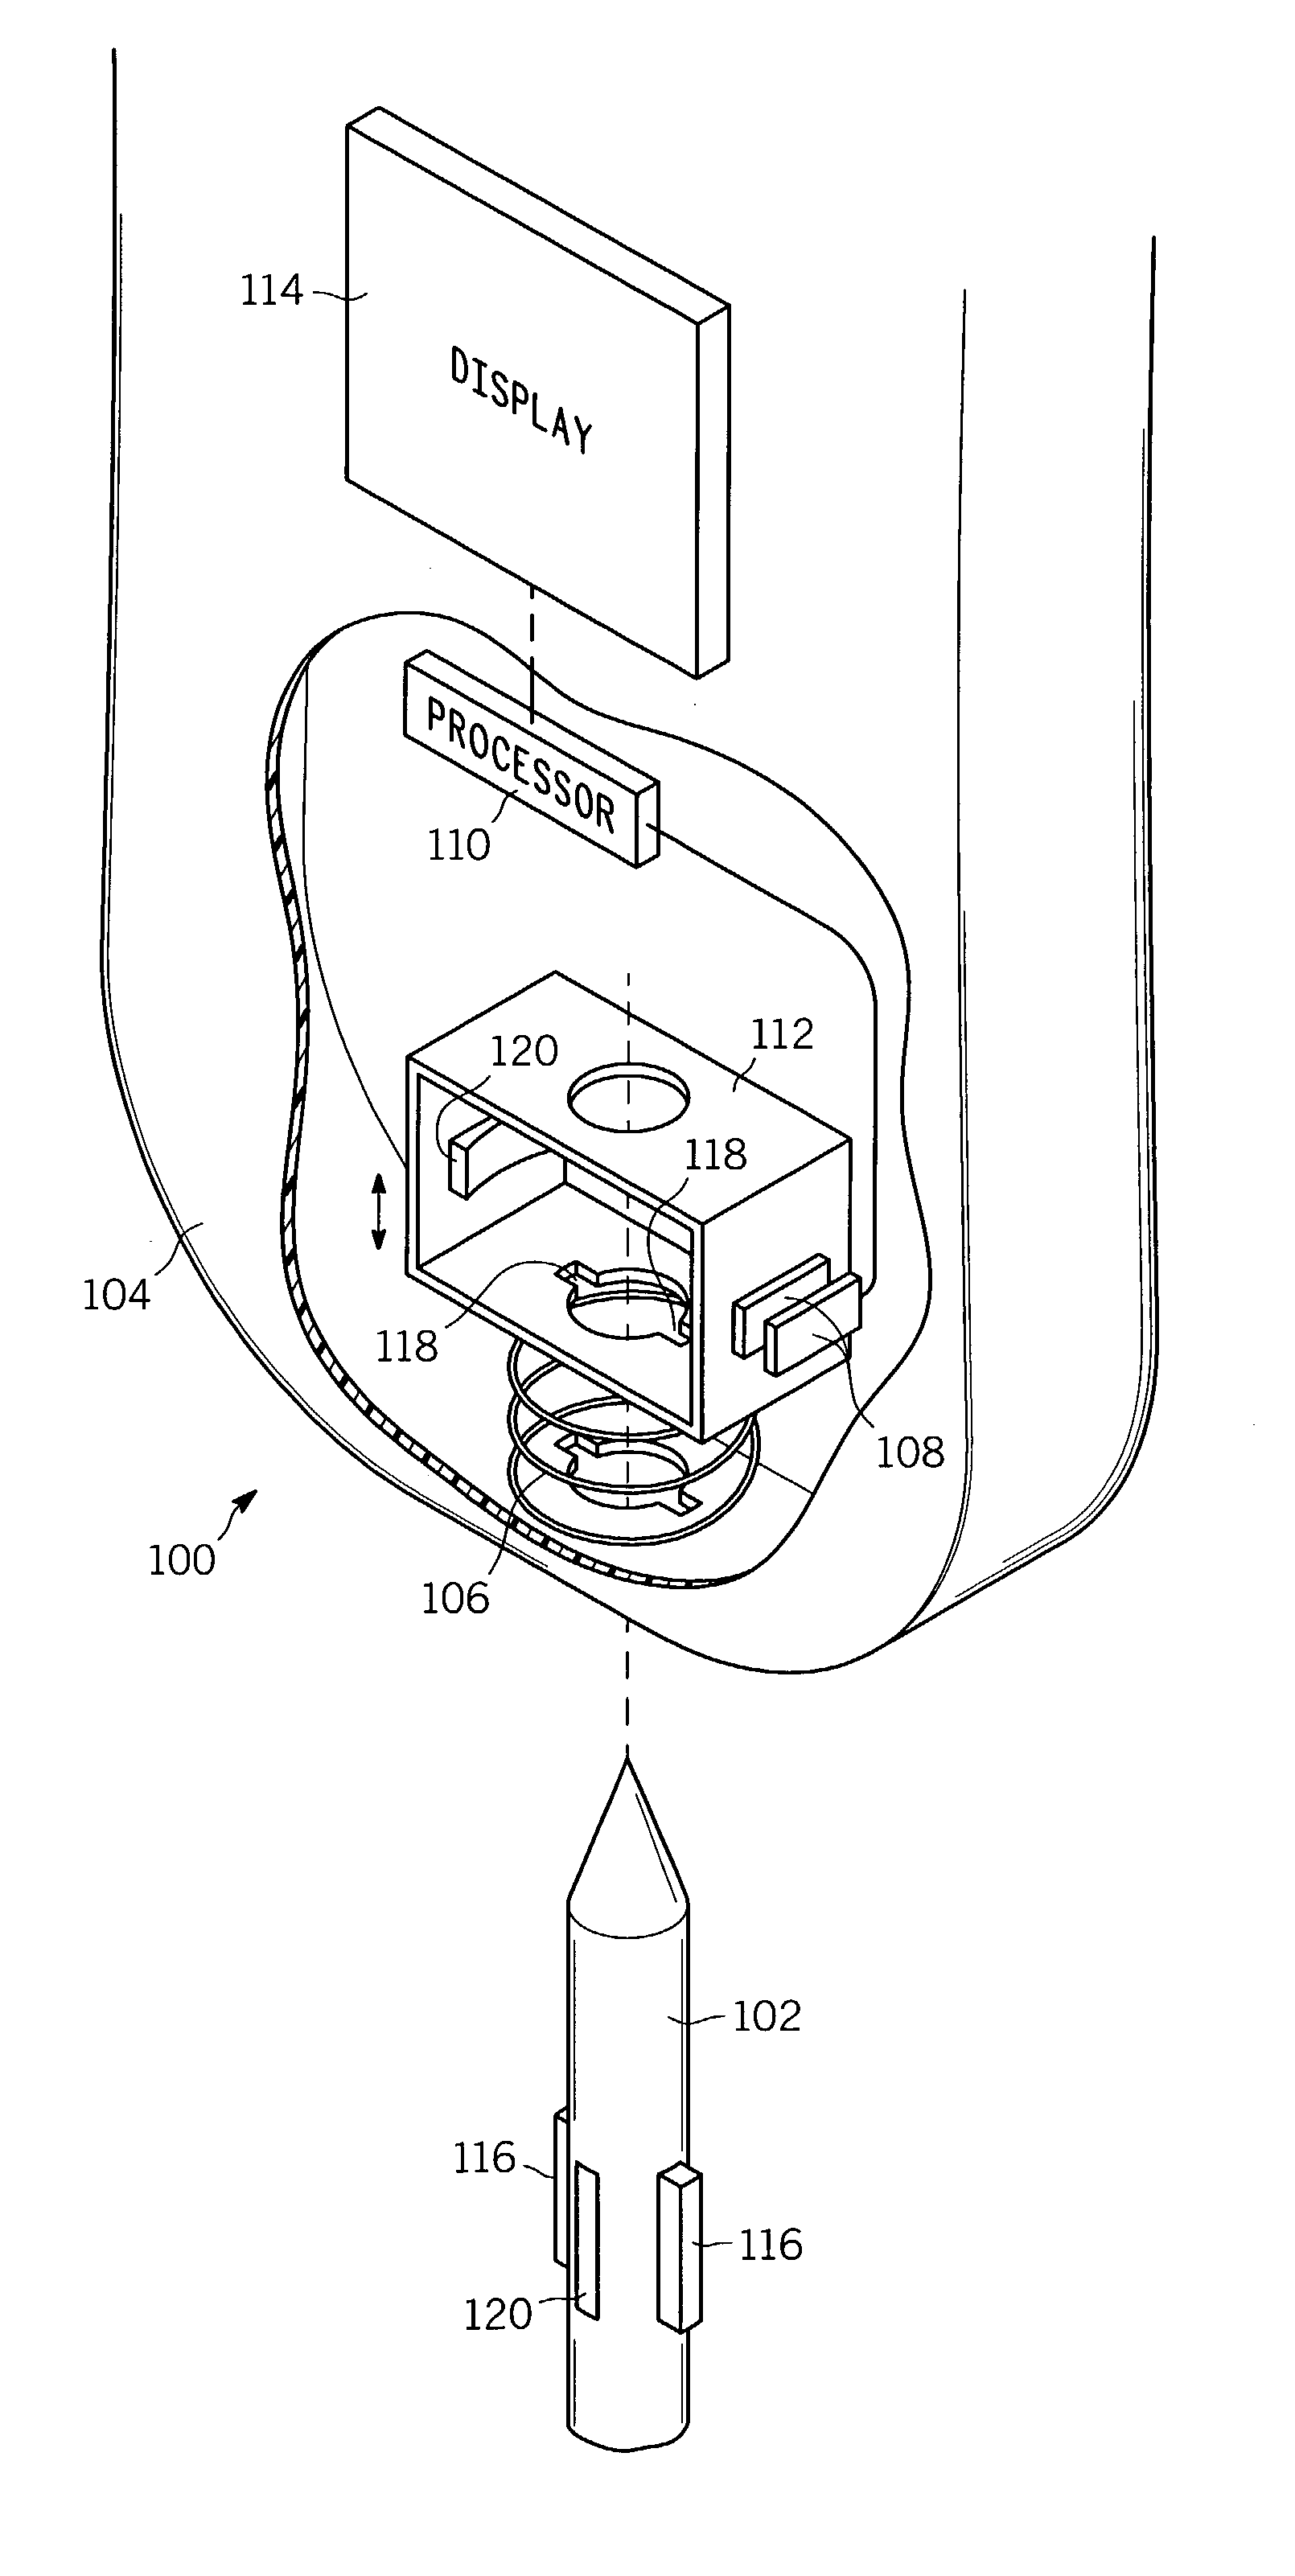 Proportional force input apparatus for an electronic device